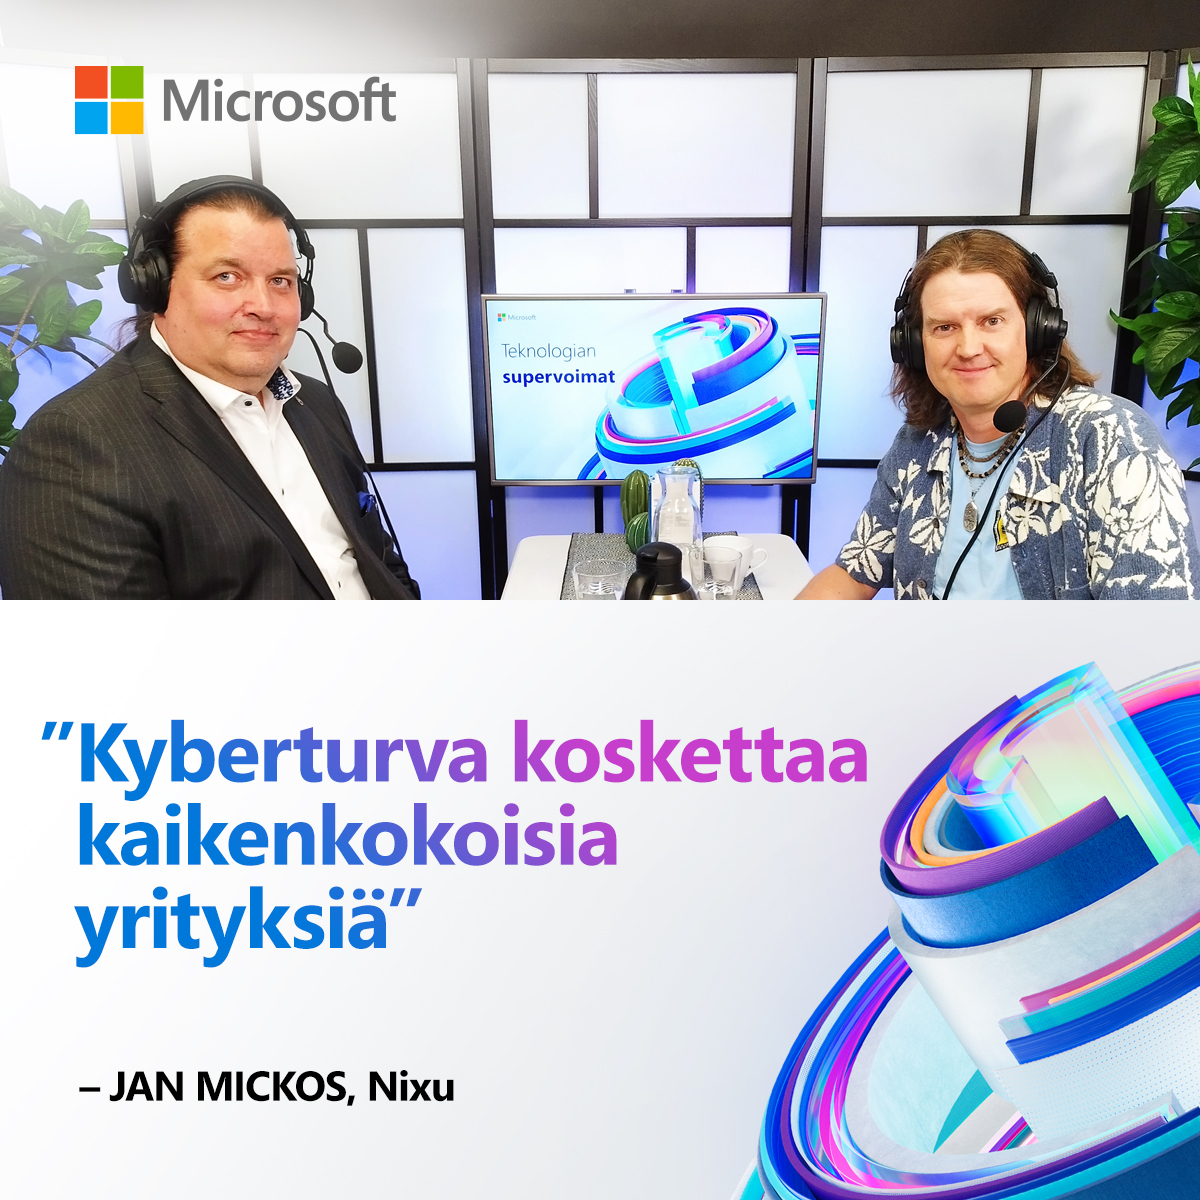 Jan Mickos as Microsoft Partner of the Year podcast guest